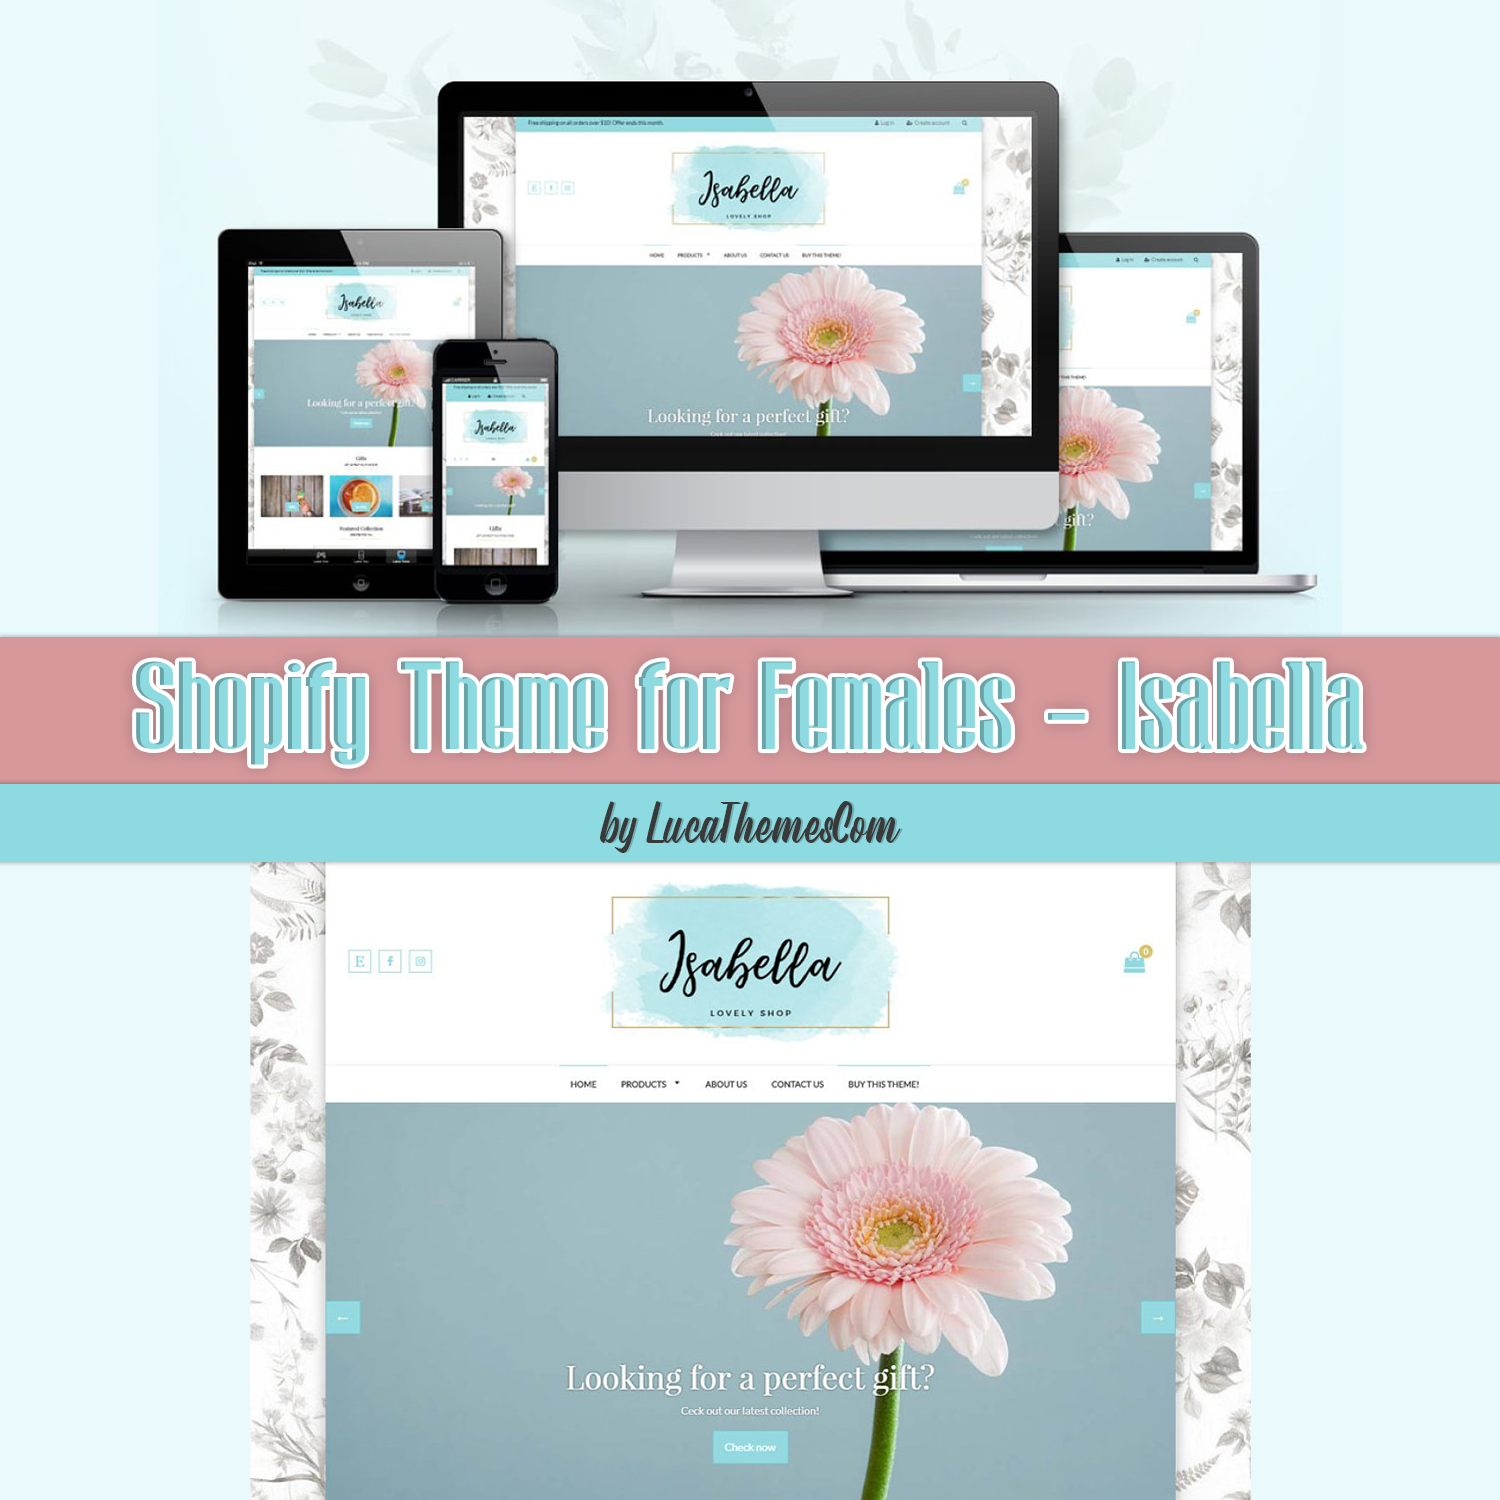 Preview shopify theme for females isabella.